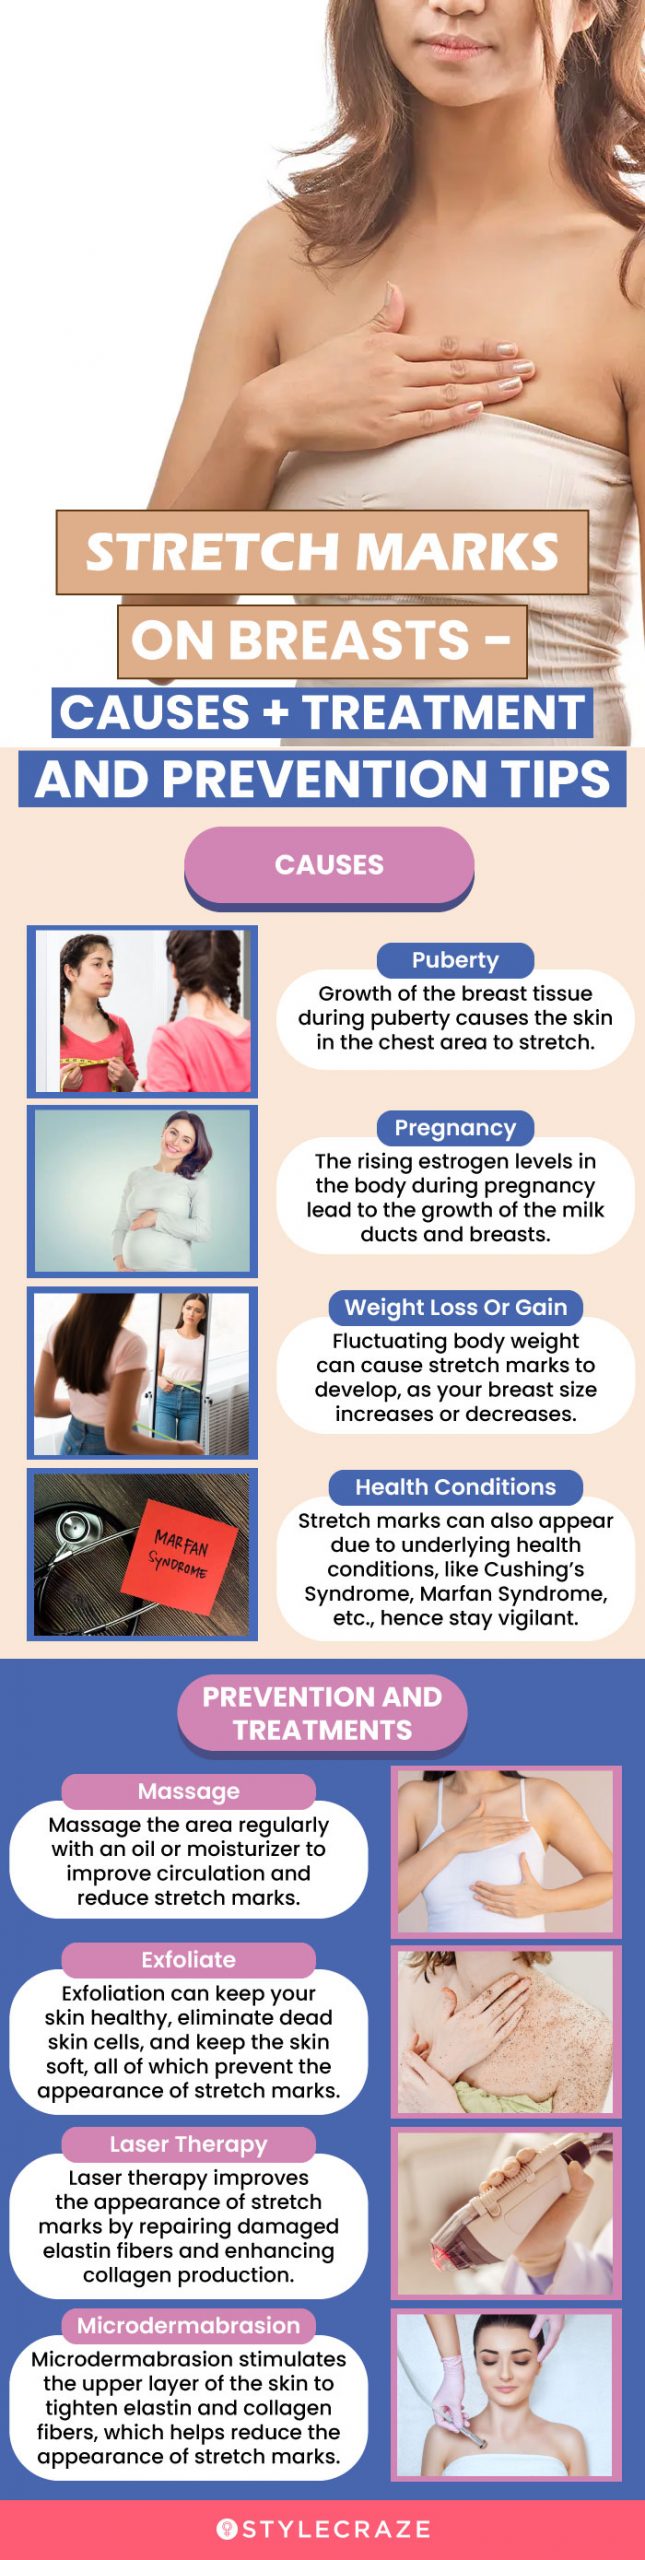 causes of stretch marks on breasts, prevention, and treatment (infographic)